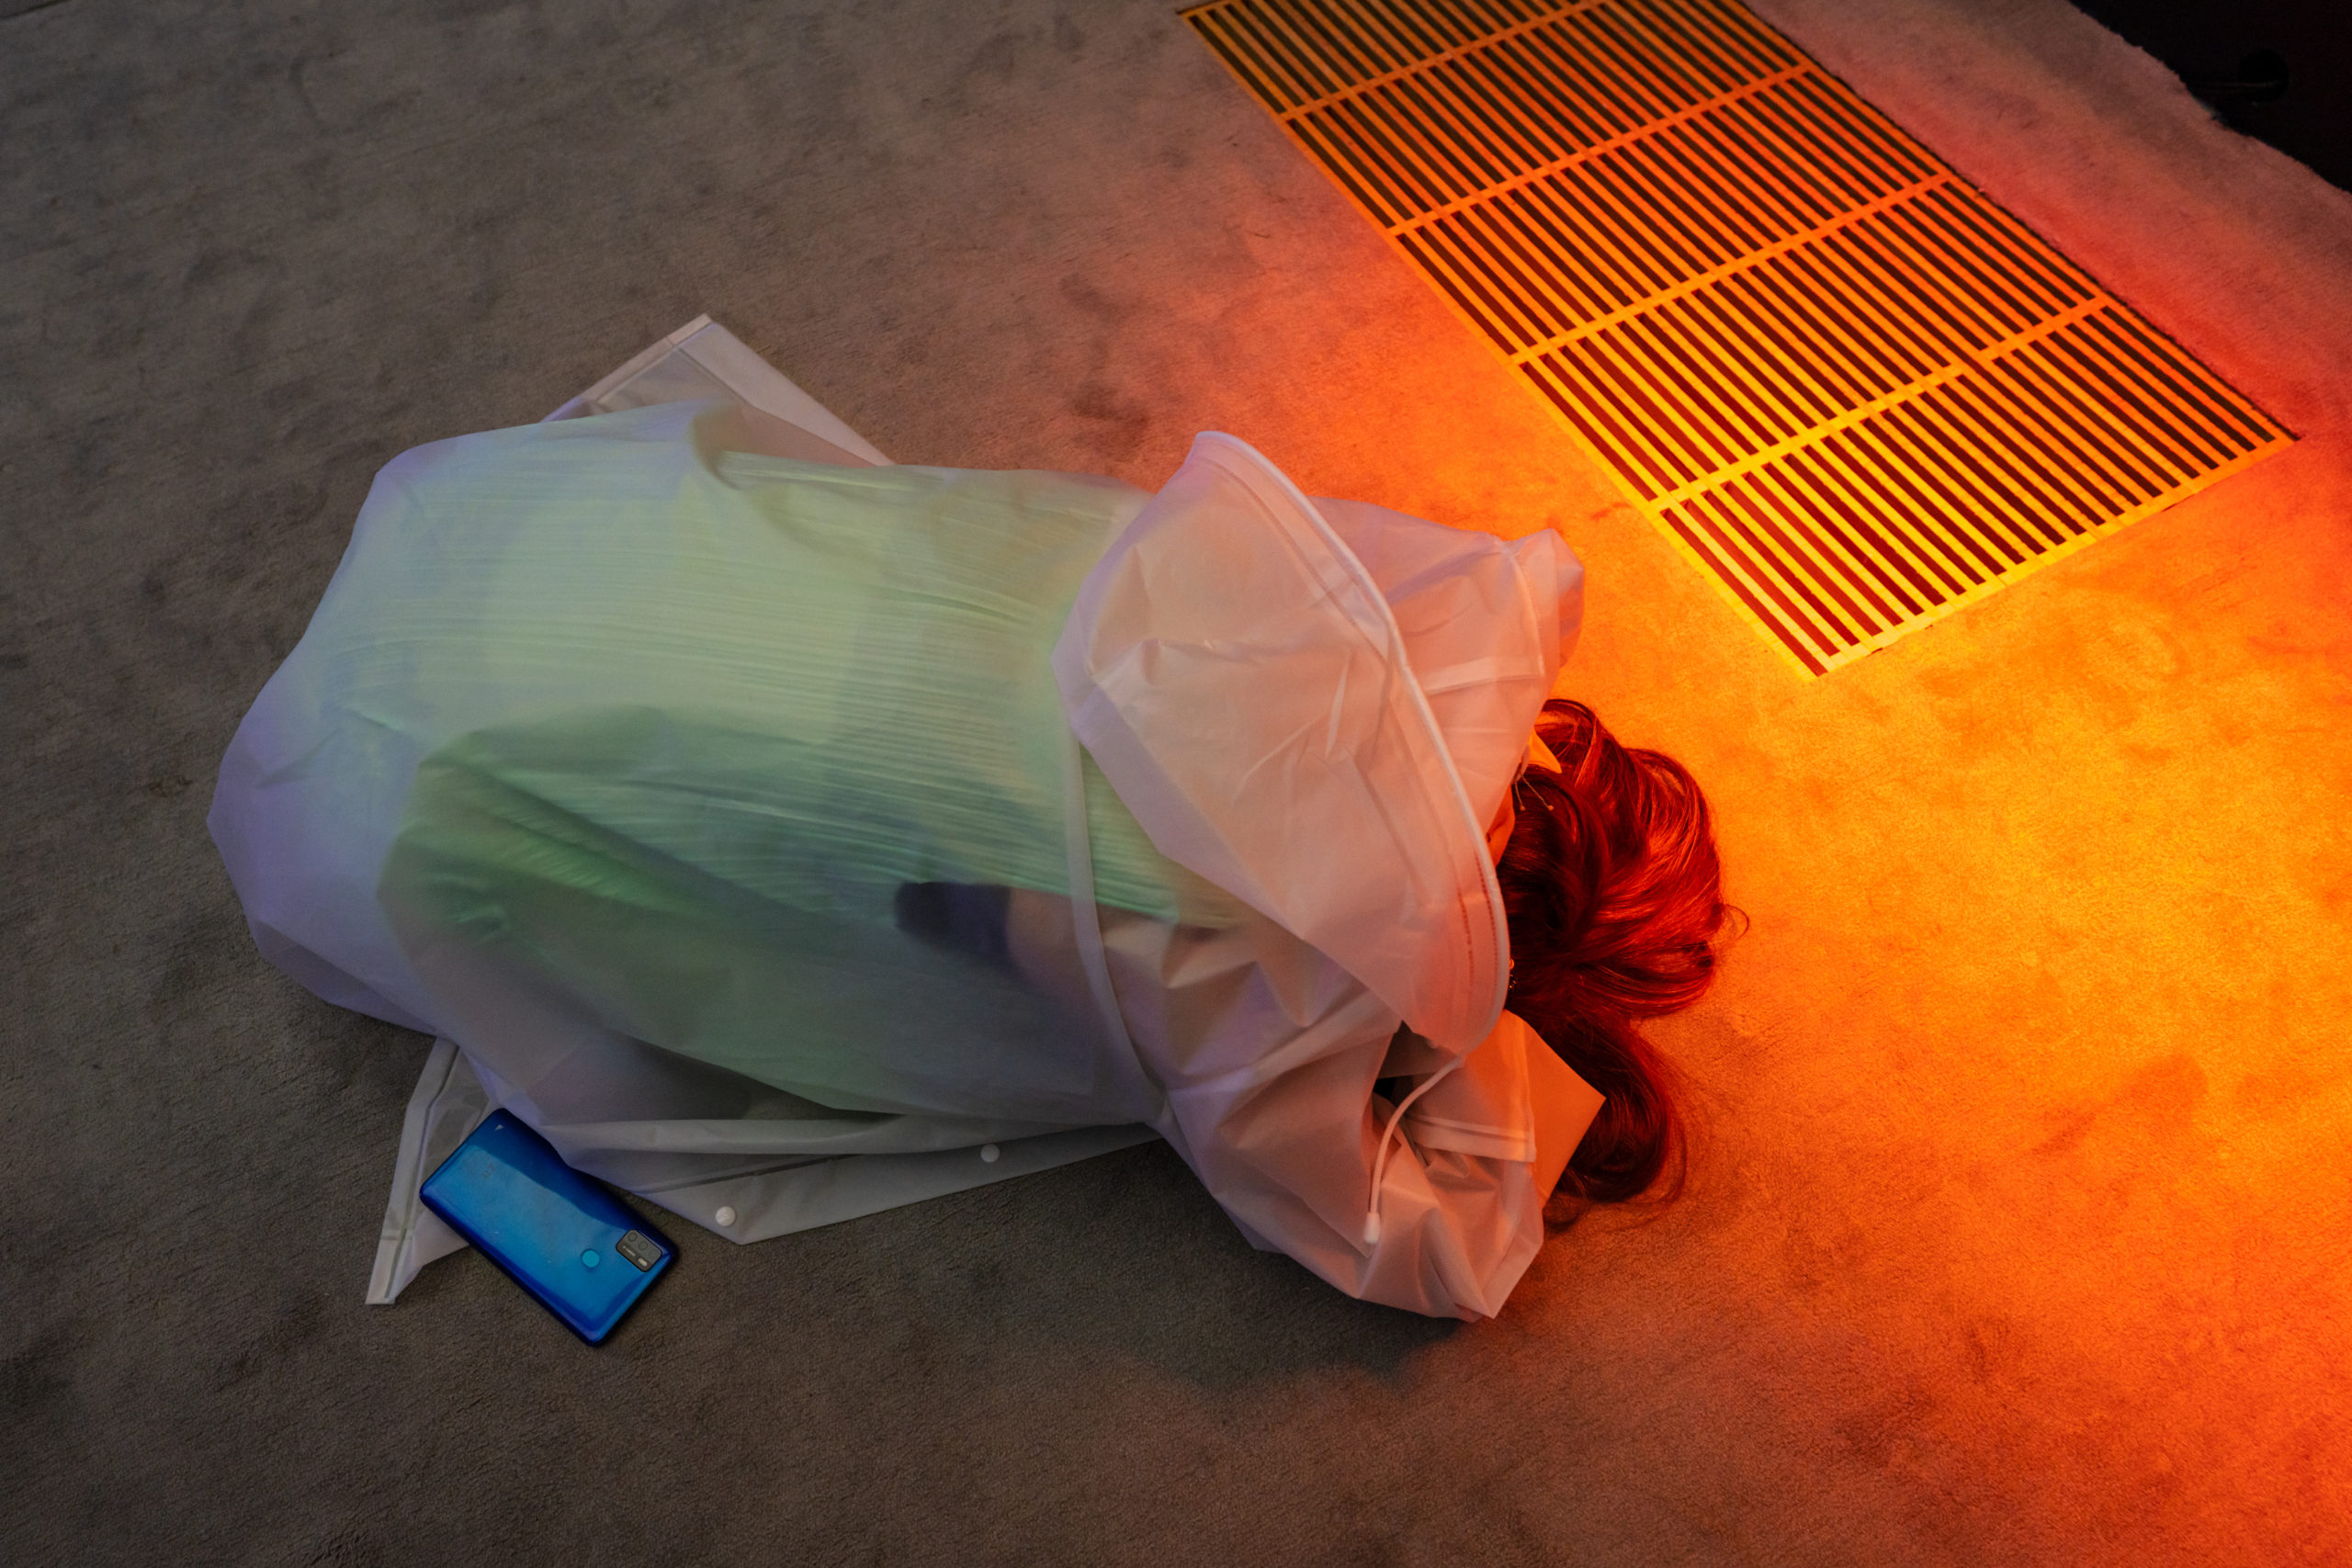 A person kneeling over with their head in their arms on the ground. A bright yellow orange light shines in the top right corner highlighting a vent on the floor next to the person and a bright blue phone on the ground in the bottom left corner. courtesy of the artist